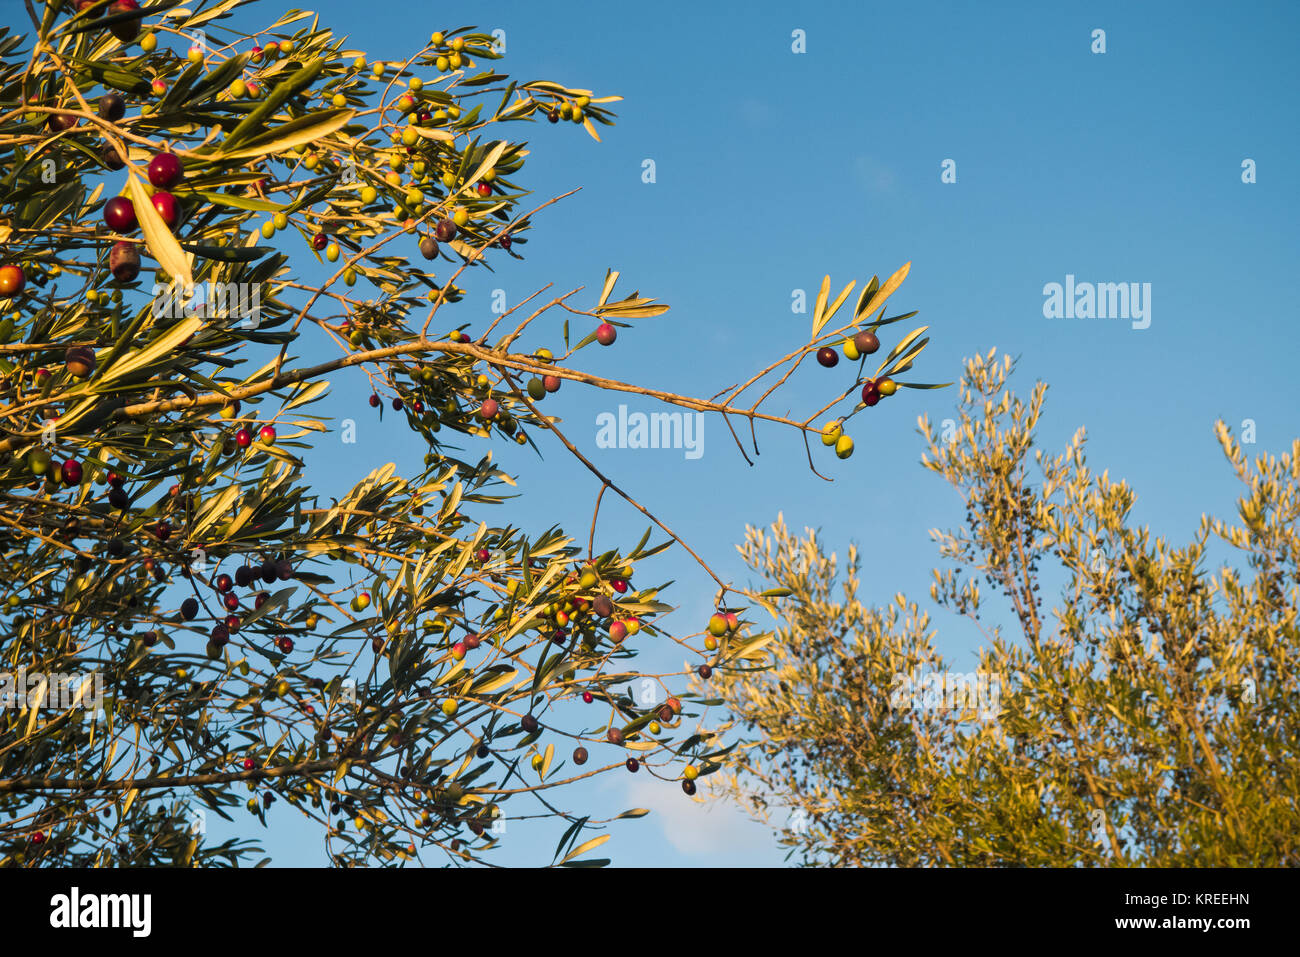 cultivation and growth of quality olives in Puglia. Stock Photo